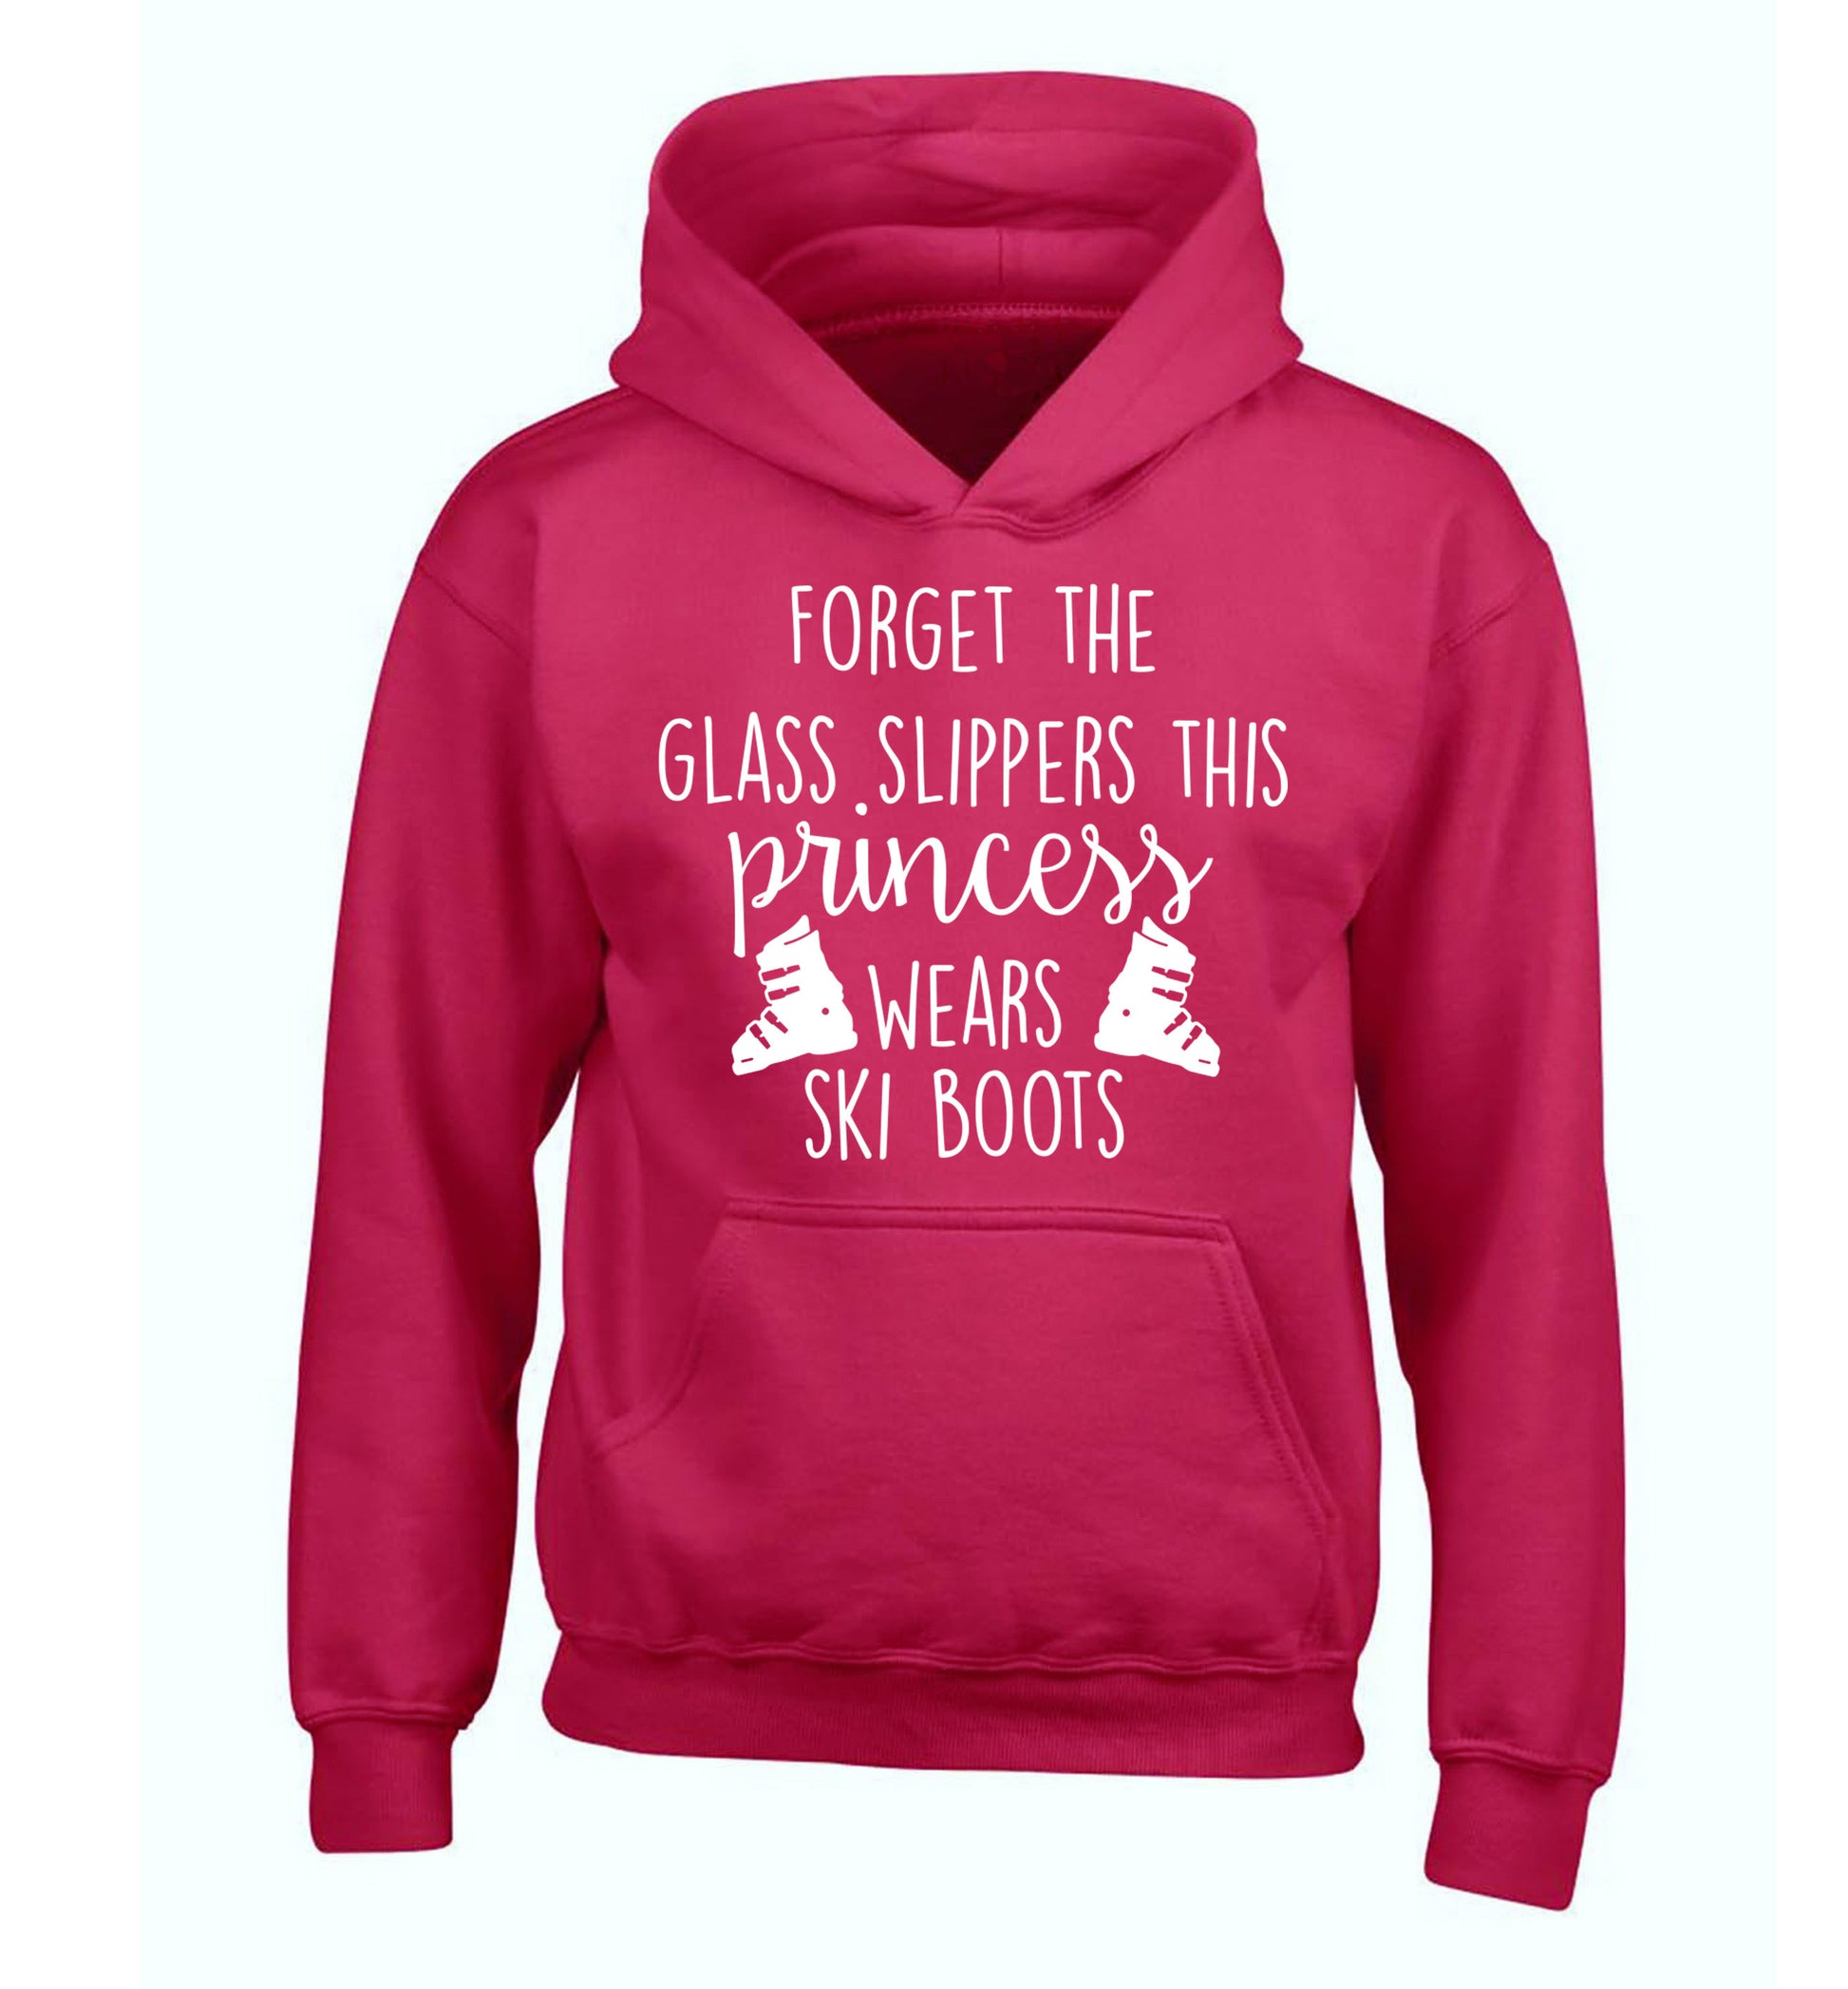 Forget the glass slippers this princess wears ski boots children's pink hoodie 12-14 Years